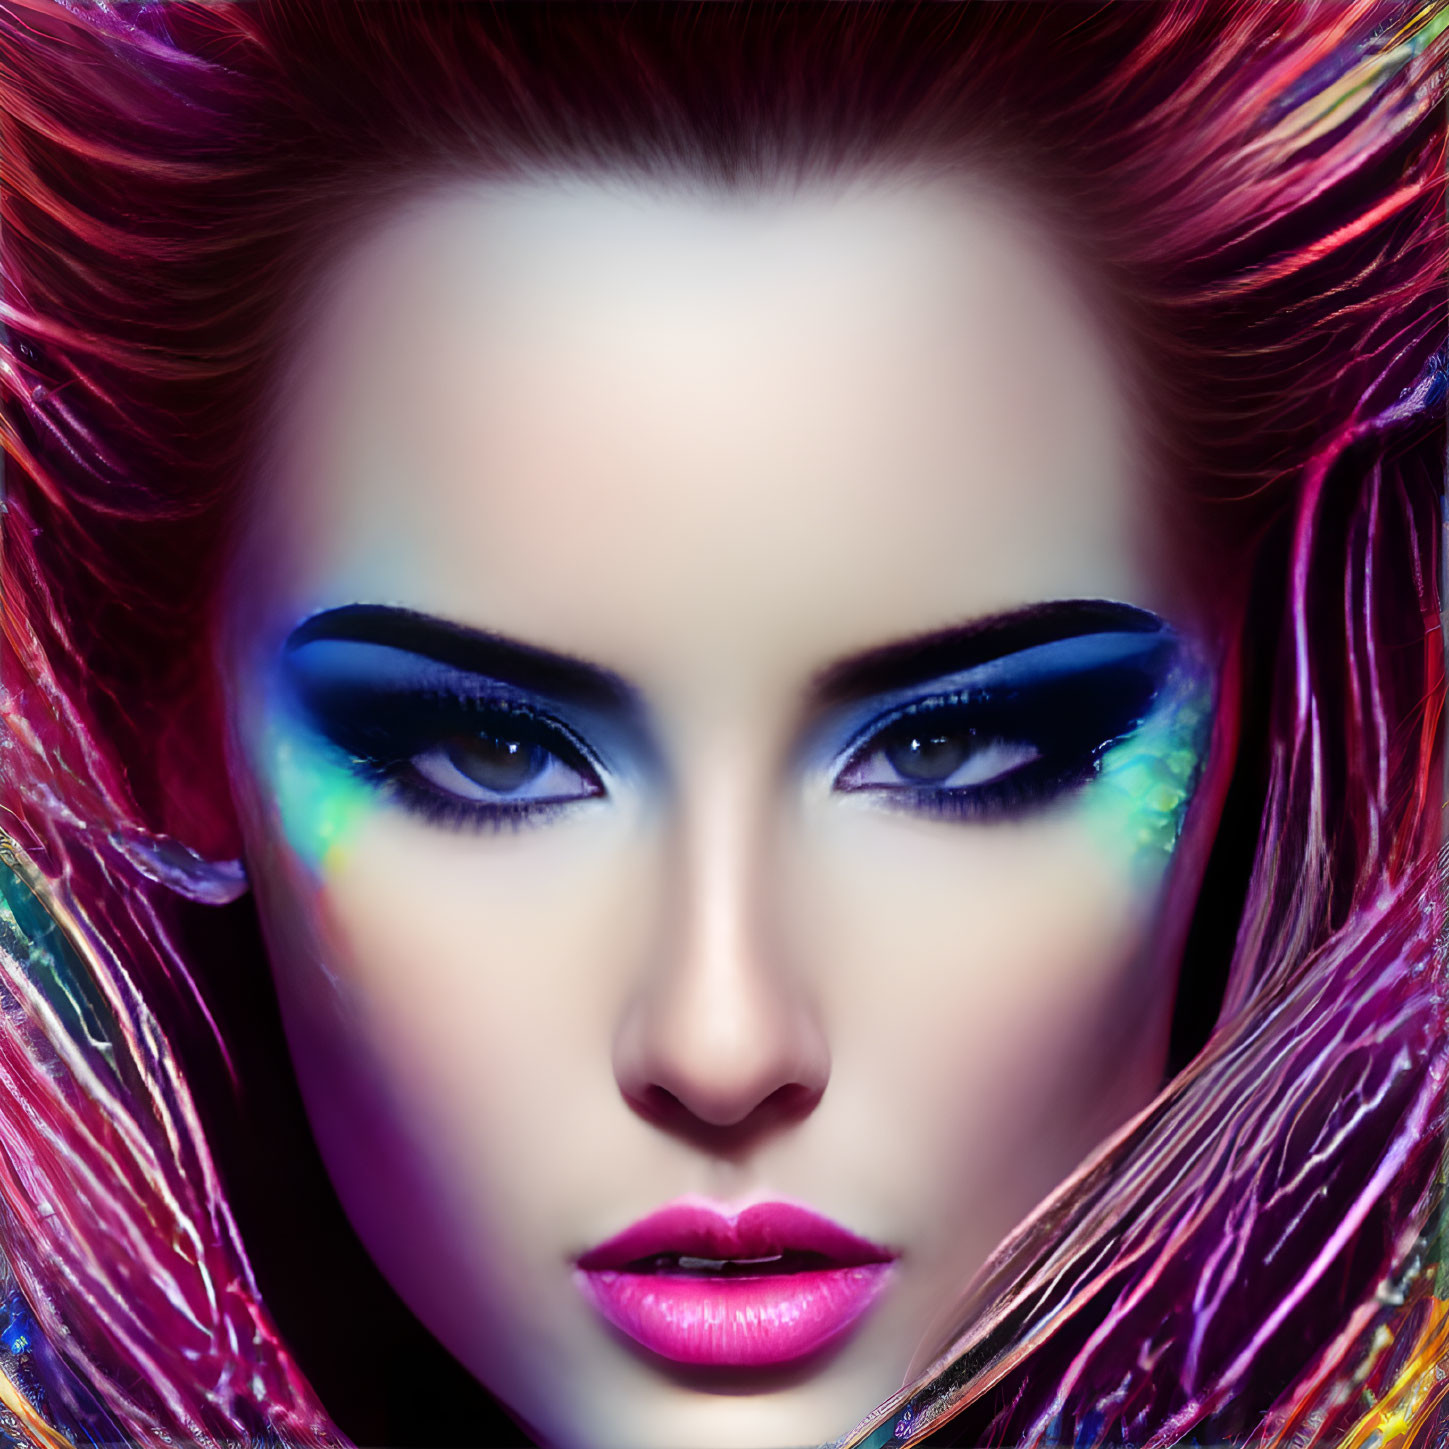 Portrait of Woman with Vibrant Makeup: Blue Eyeshadow, Pink Lipstick, Red Hair